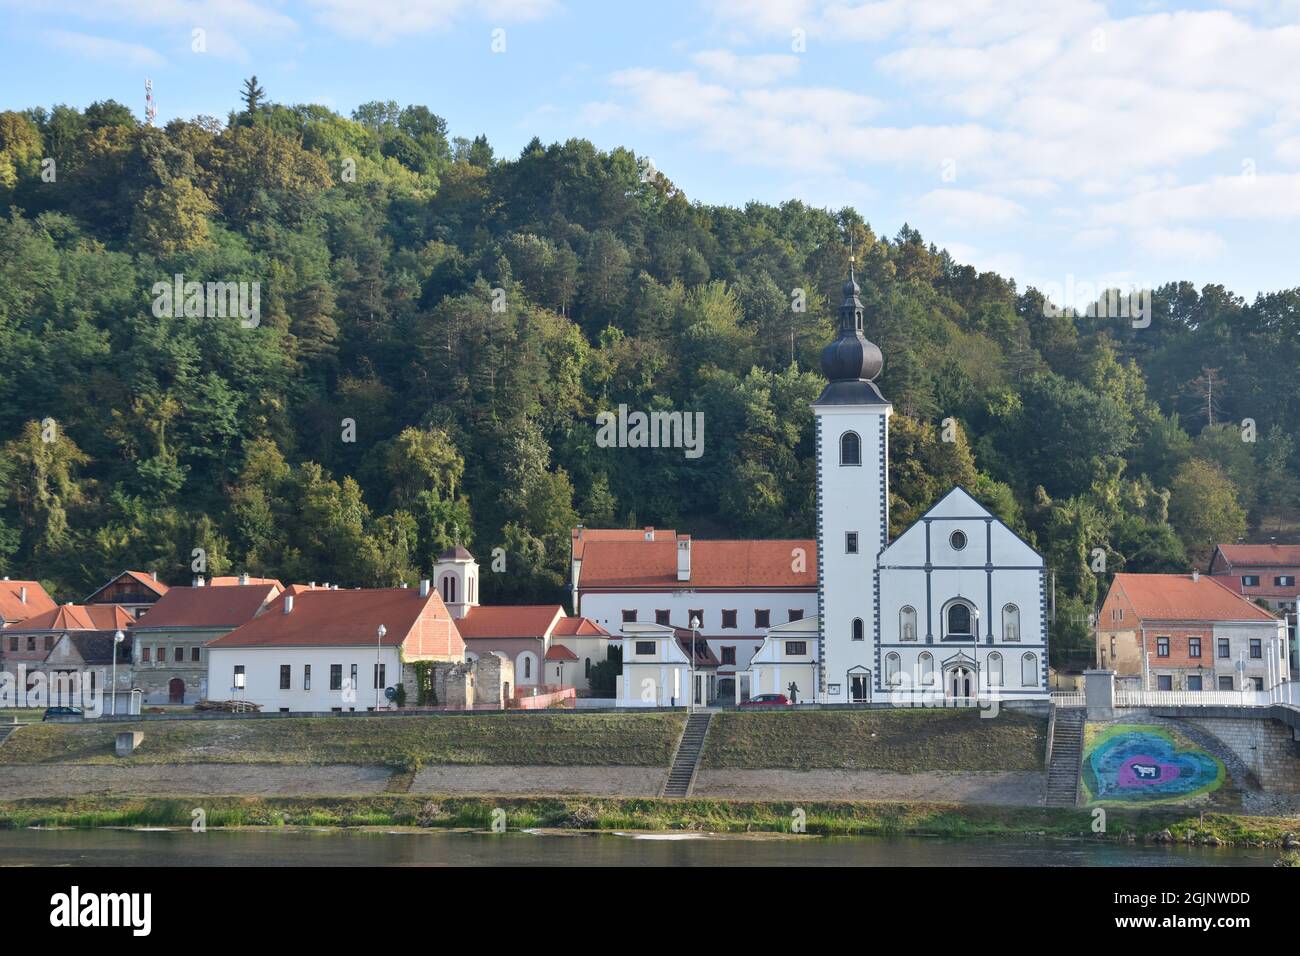 Hrvatska Kostajnica in Croatia, border town with Bosnia, Una river; catholic and orthodox churches side by side Stock Photo